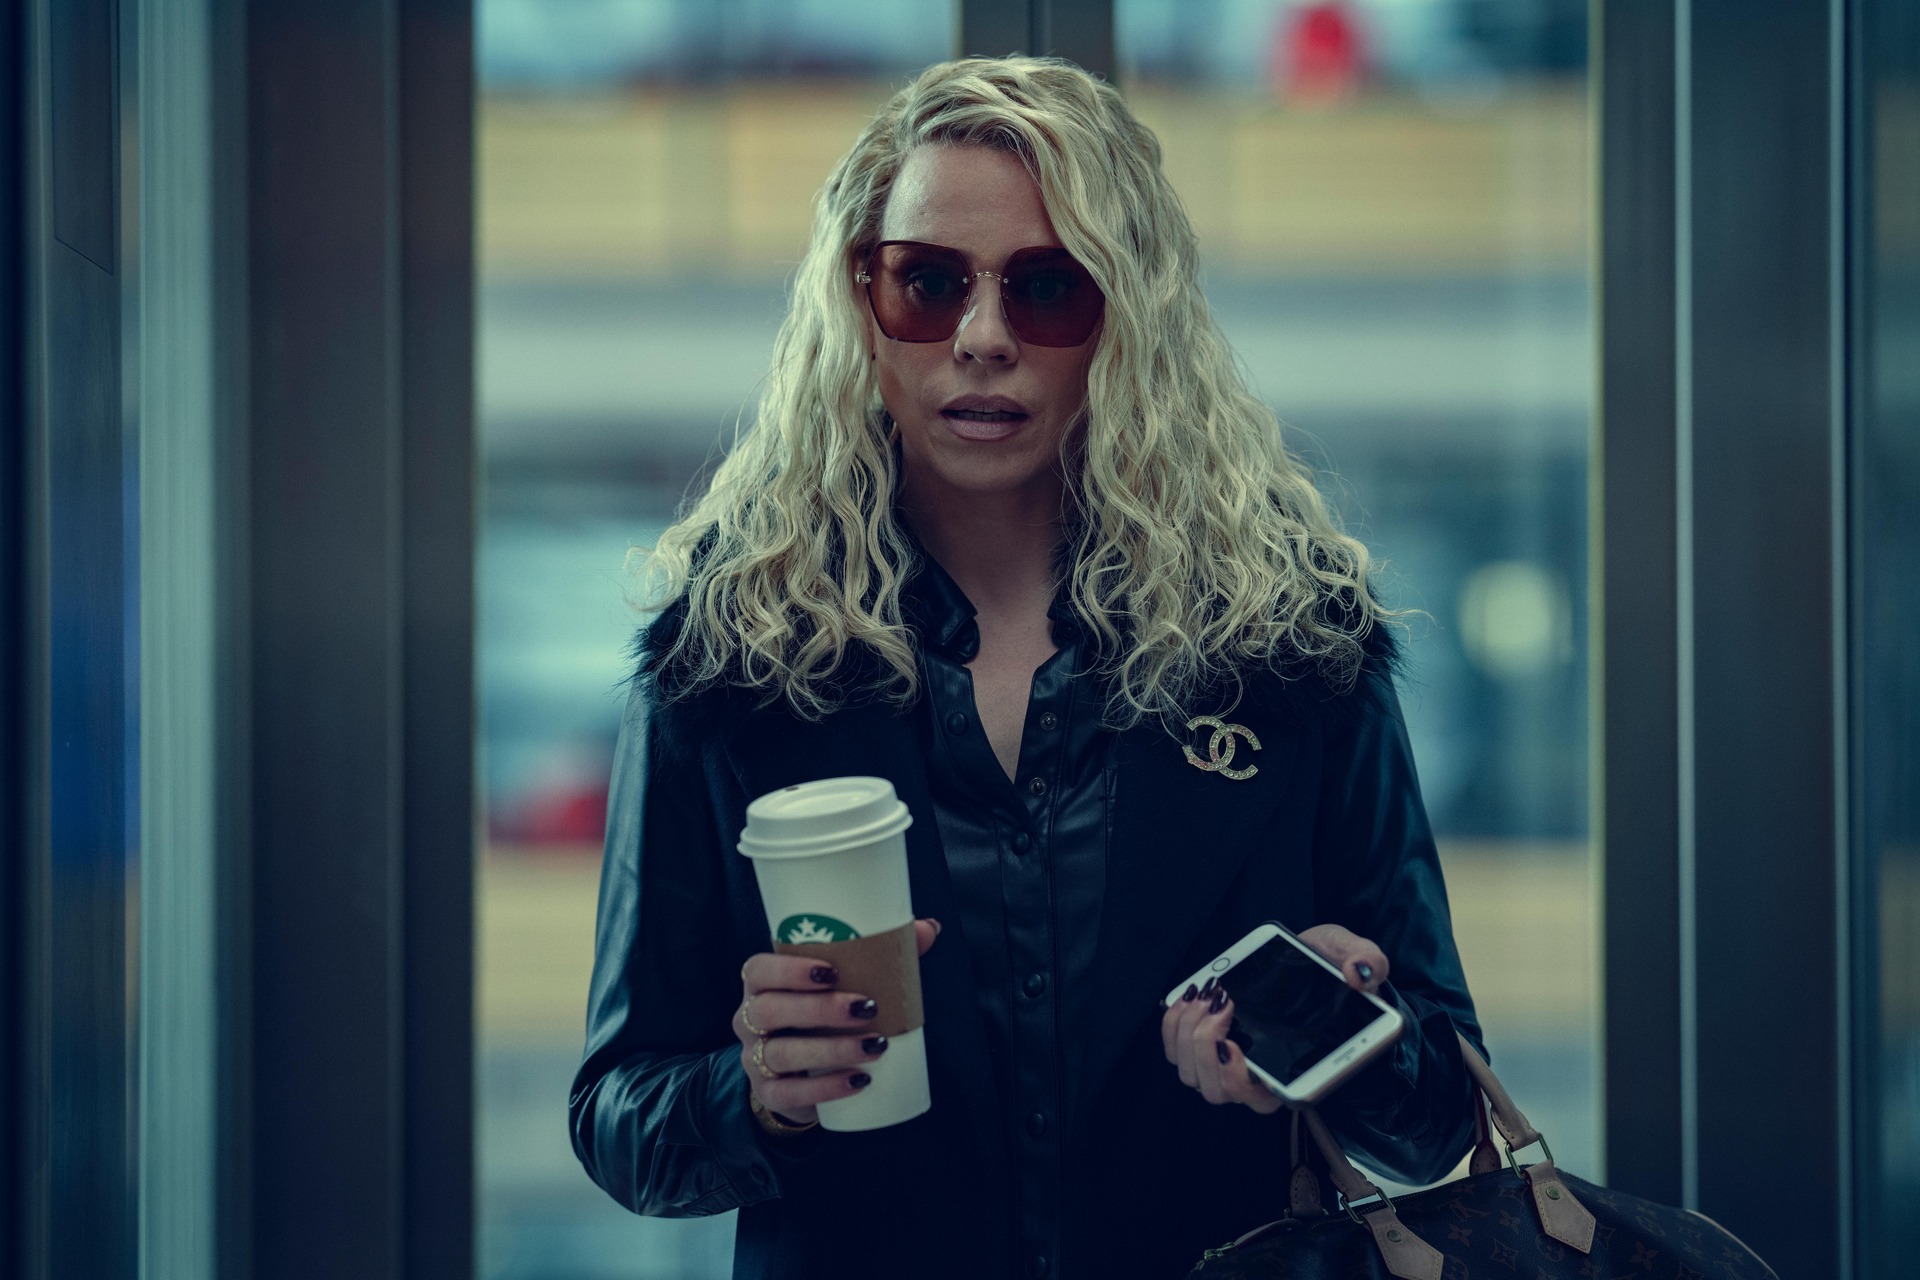 A woman holding Starbucks and a cell phone in this image from The Lighthouse.